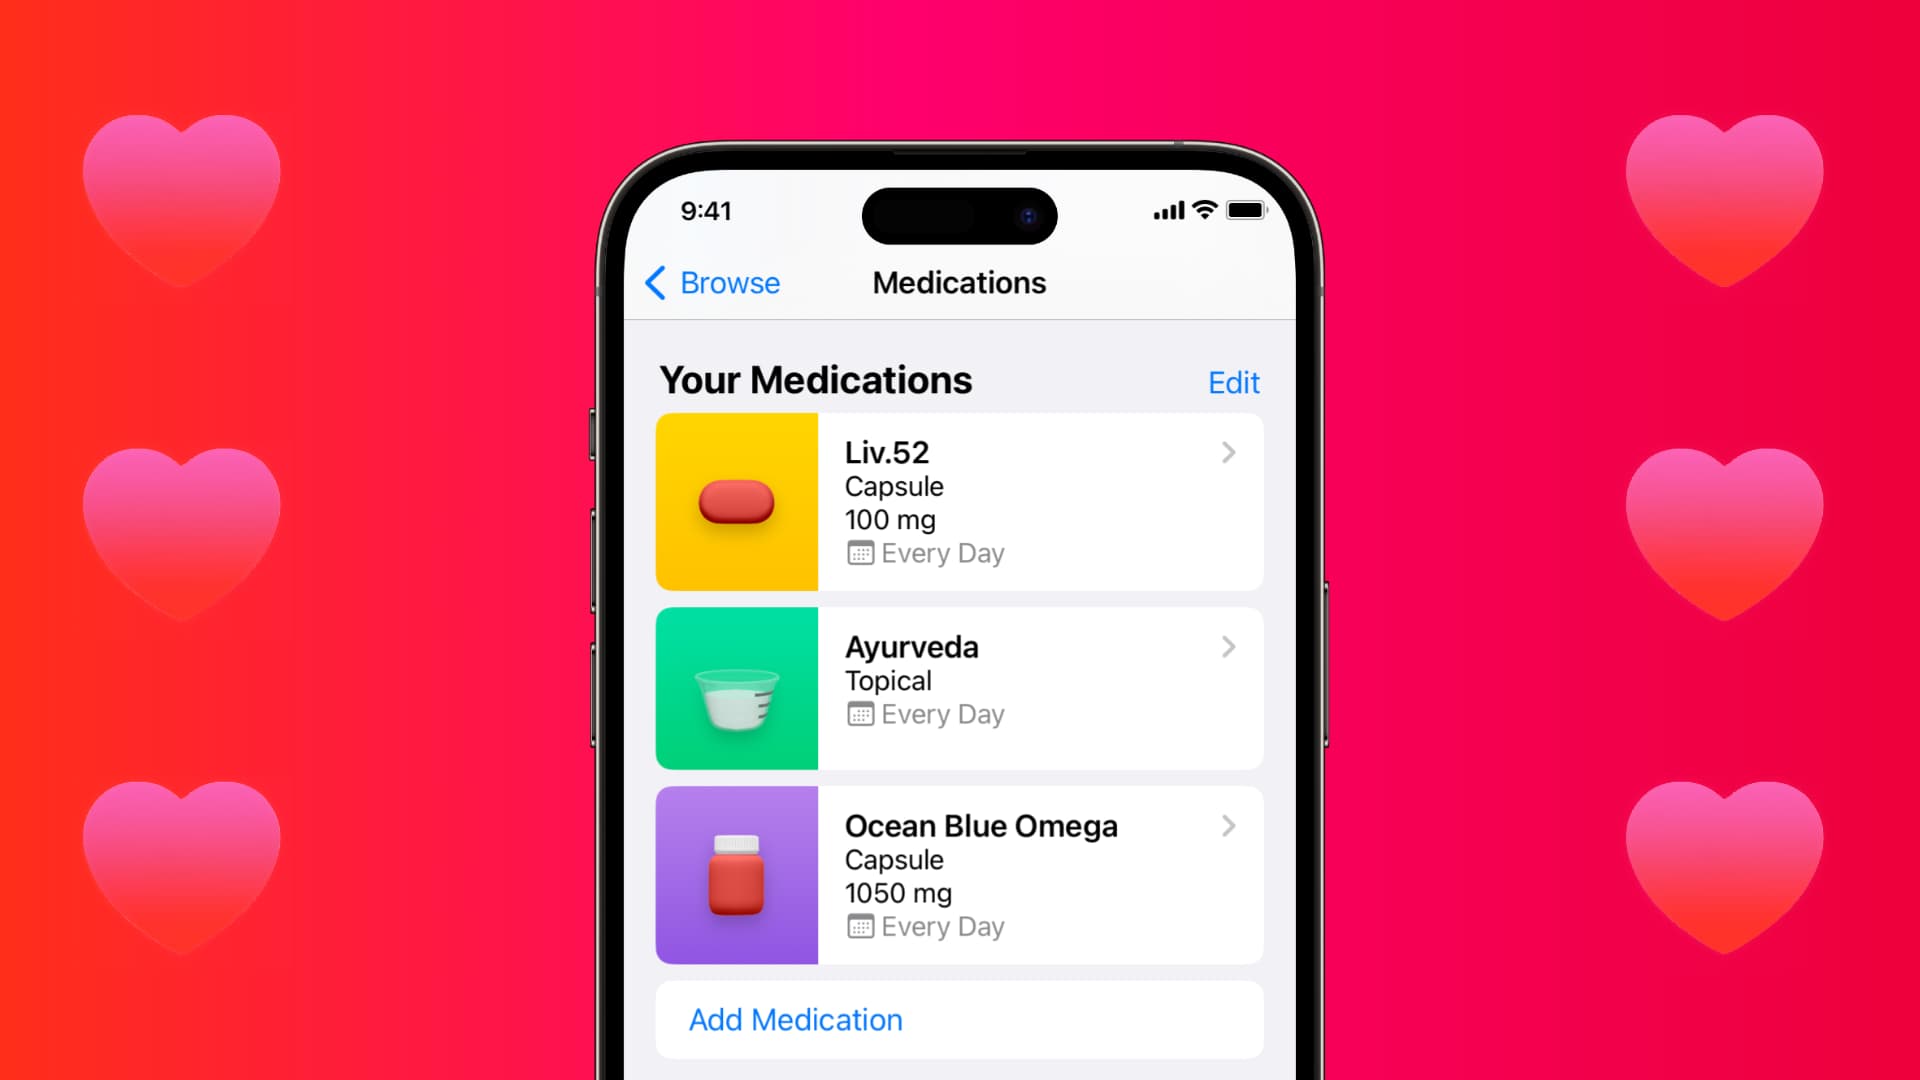 How to add your medications to your iPhone and get reminded to take them on time